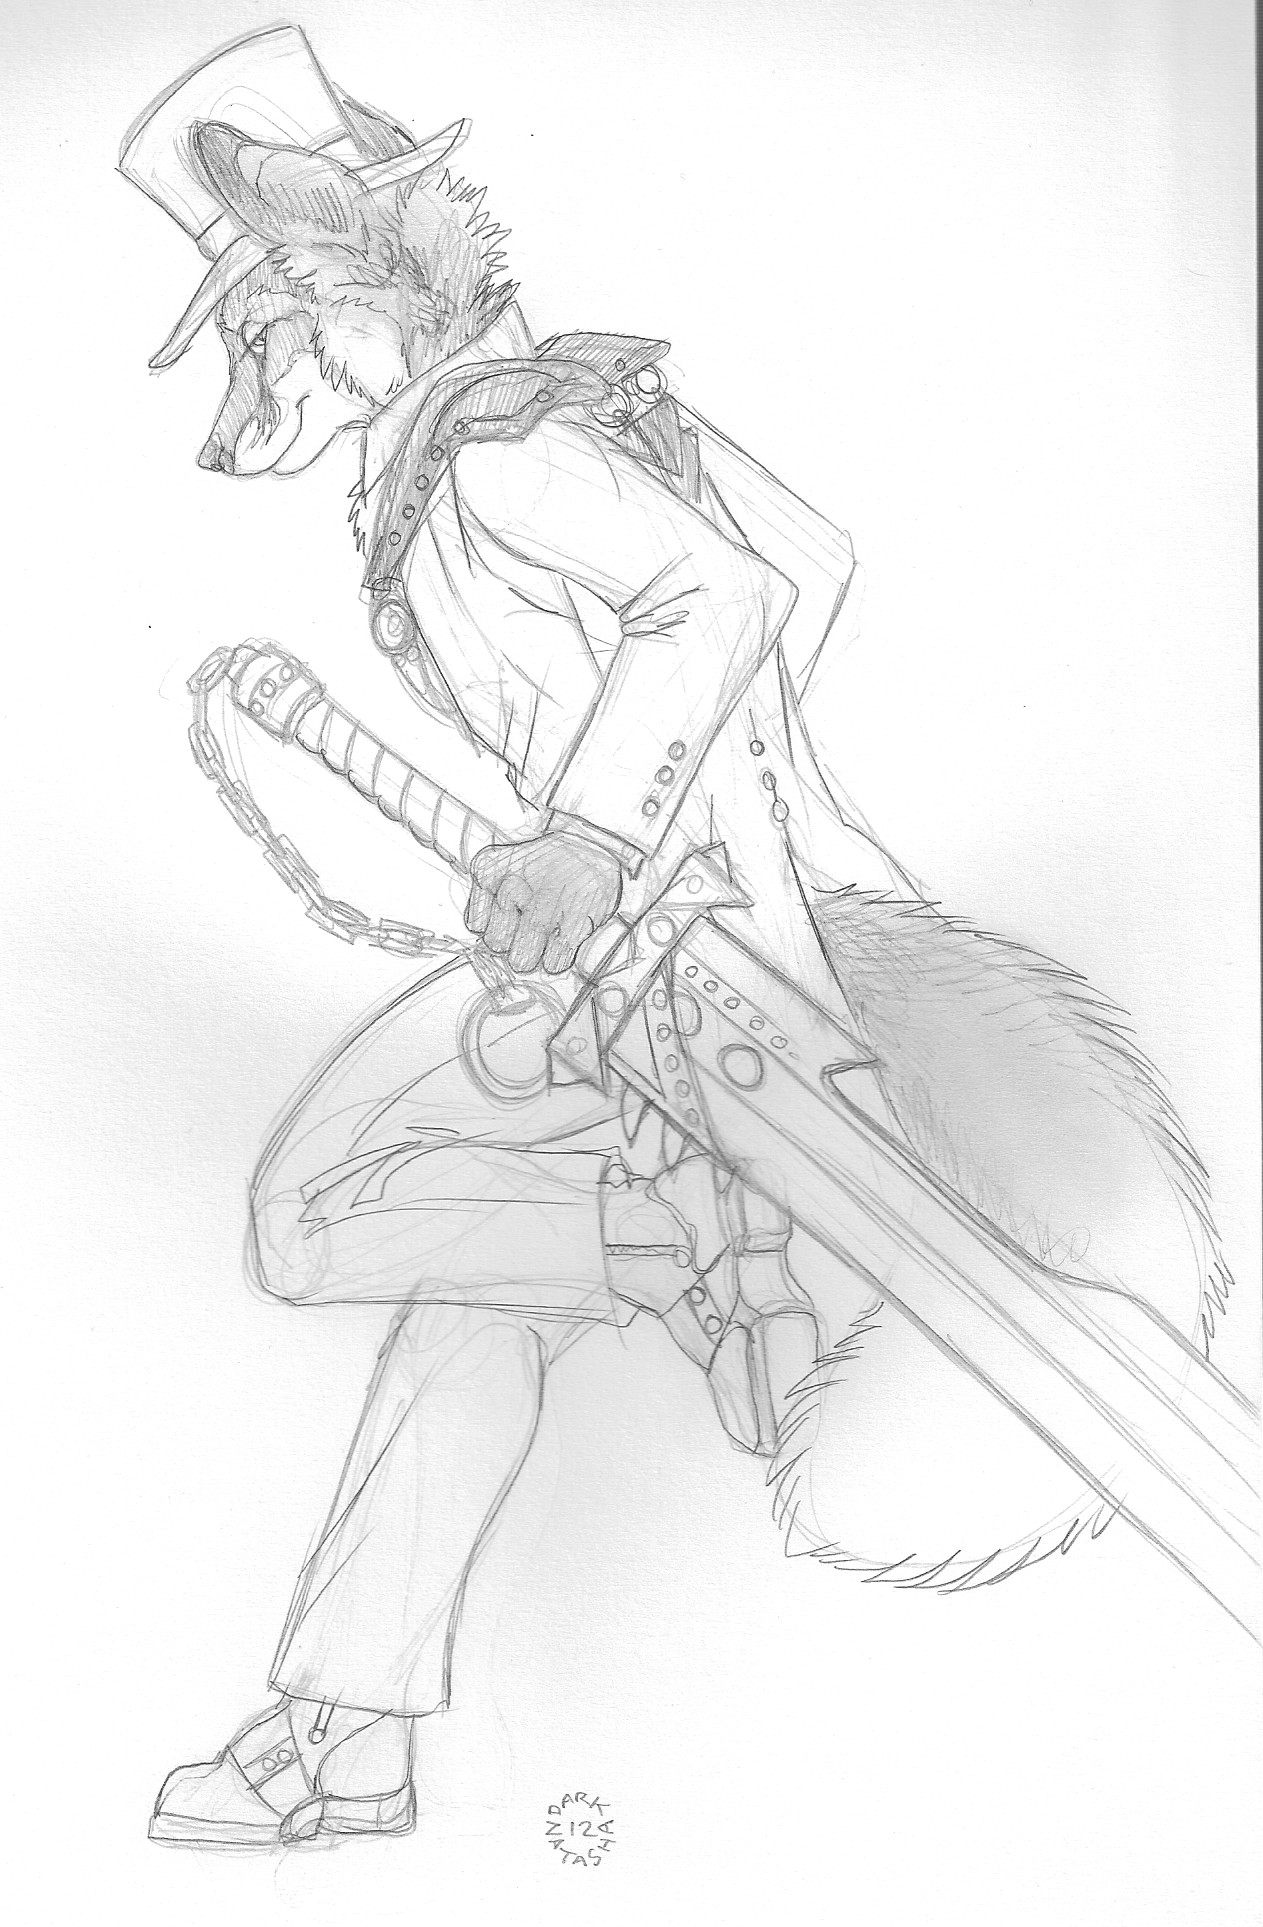 A sketch of a fox in formalwear, reclining with a massive, ornate sword.